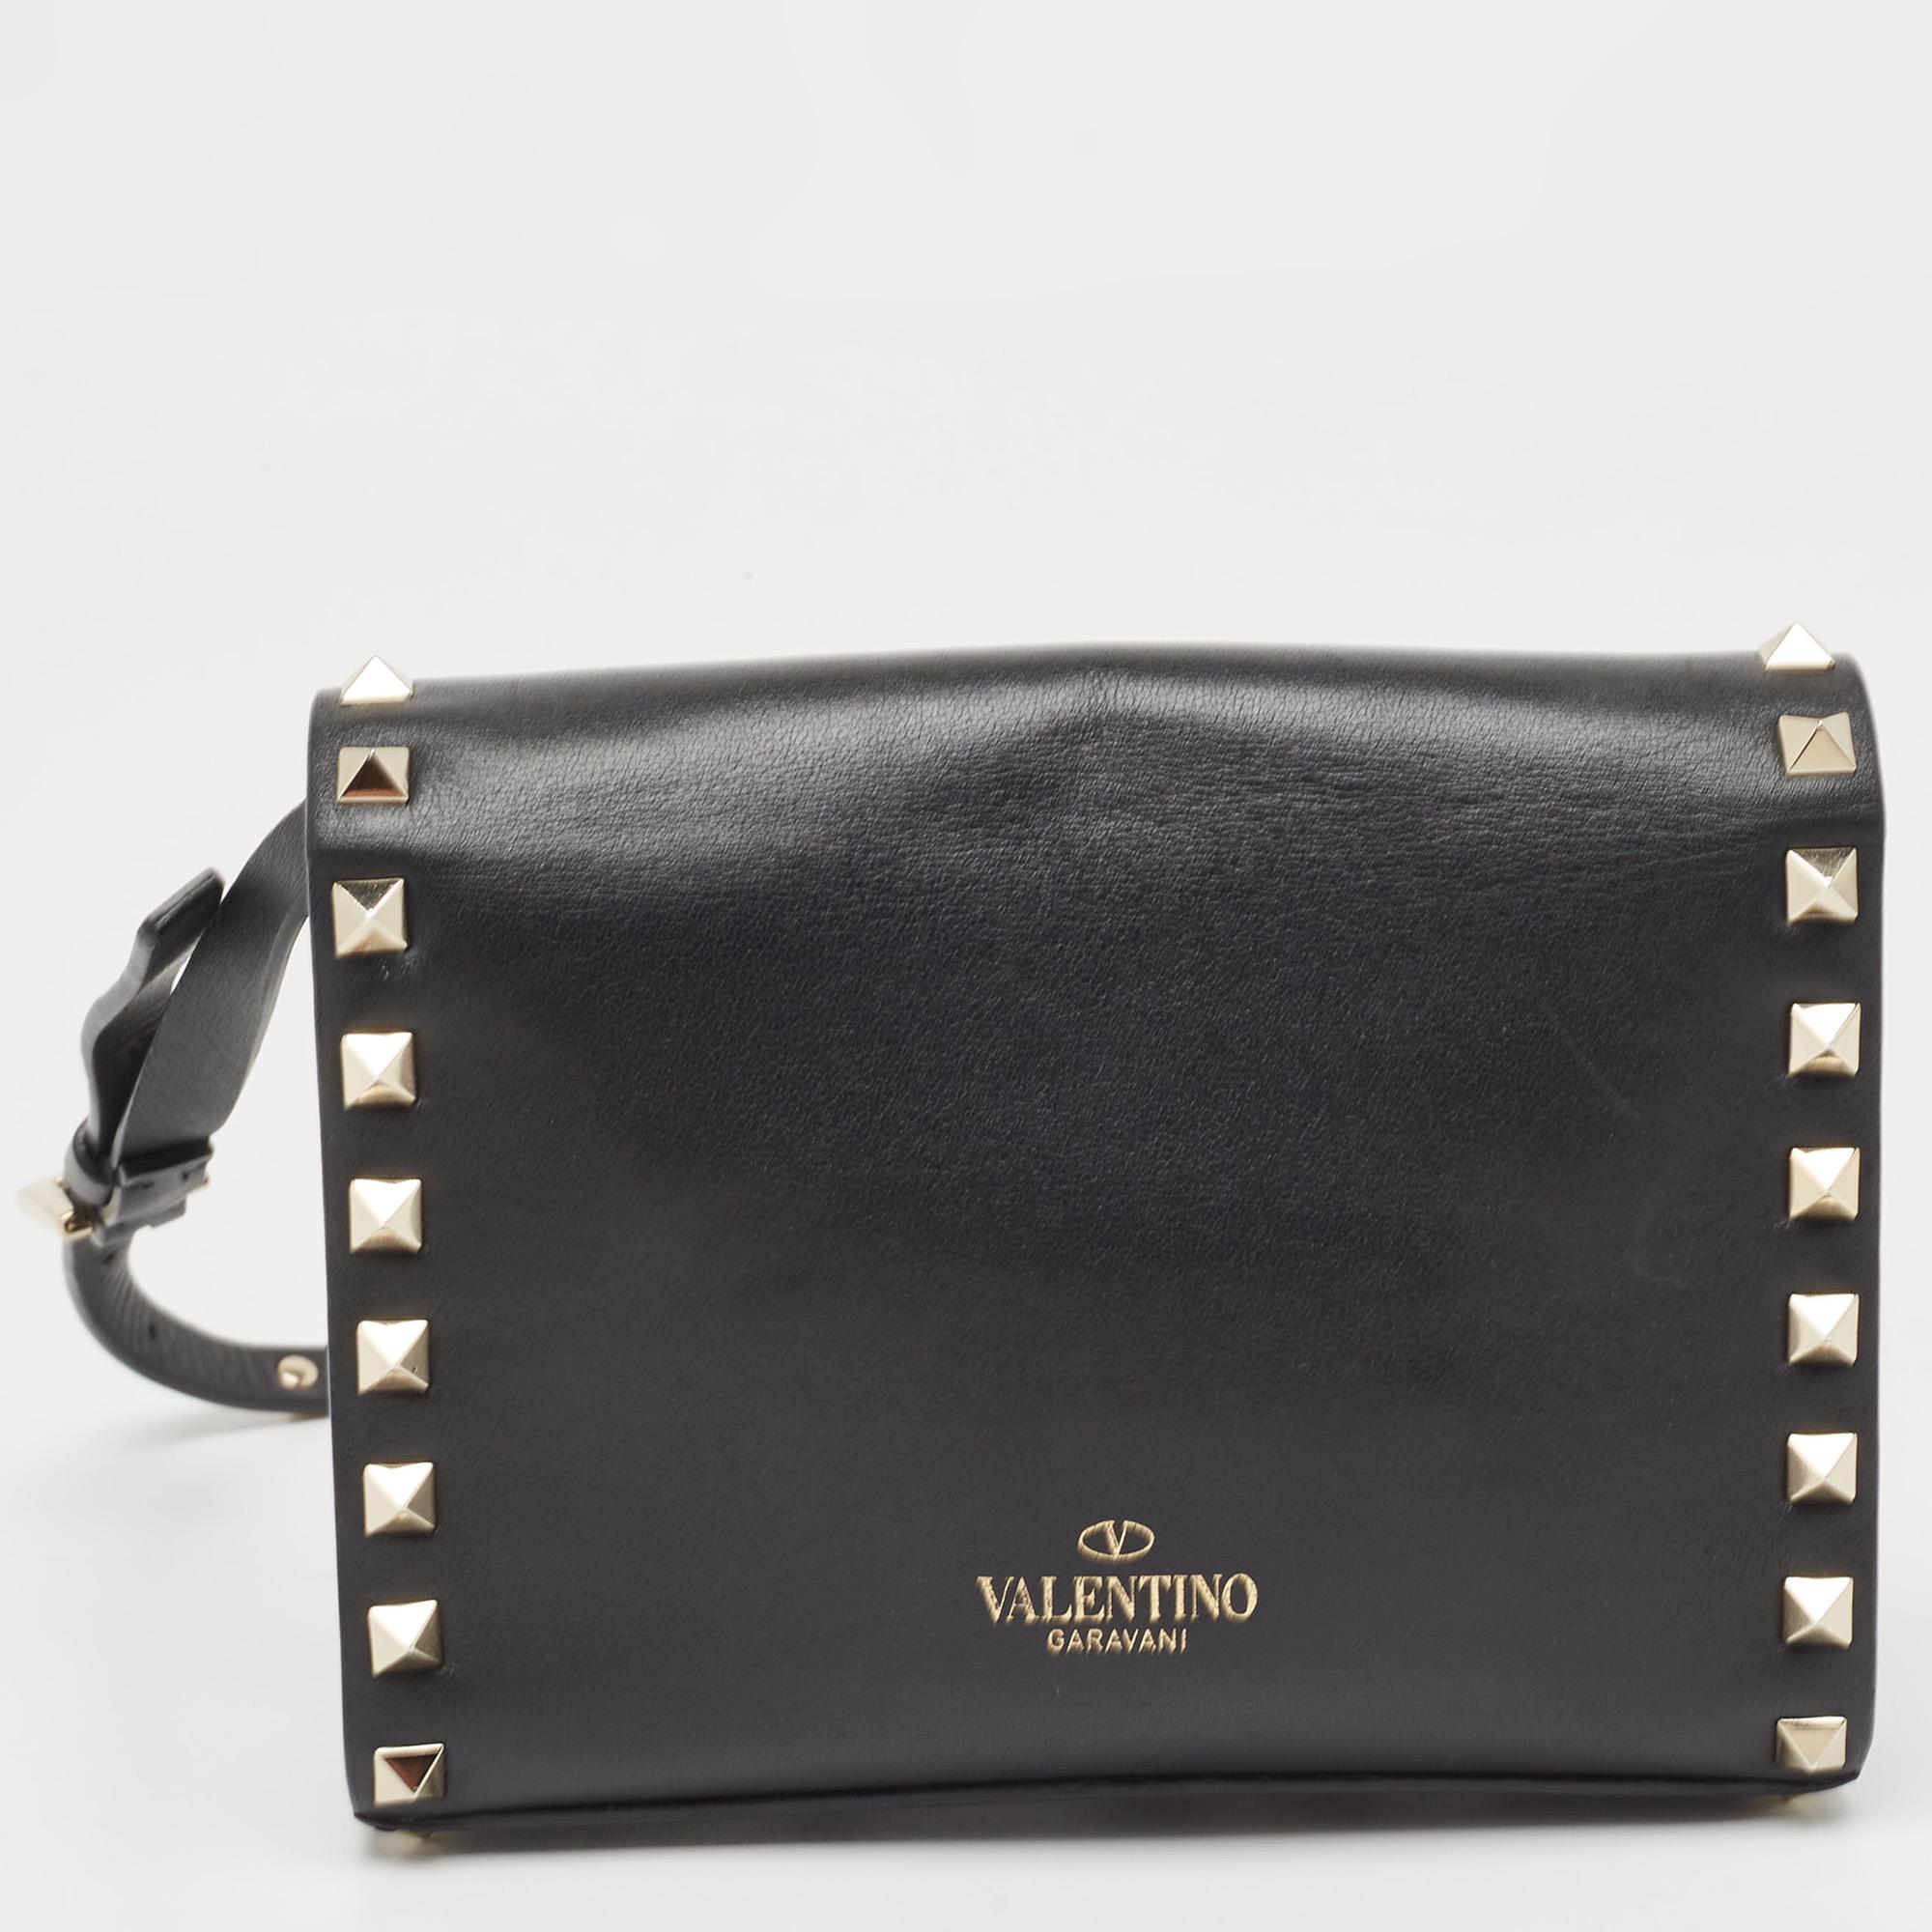 This gorgeous Valentino bag has been crafted in black leather. The exterior features Rockstud detailing in gold-tone on the strap as well as the bag. With a flap closure, the bag opens to a fabric-lined accommodating interior that can hold all your